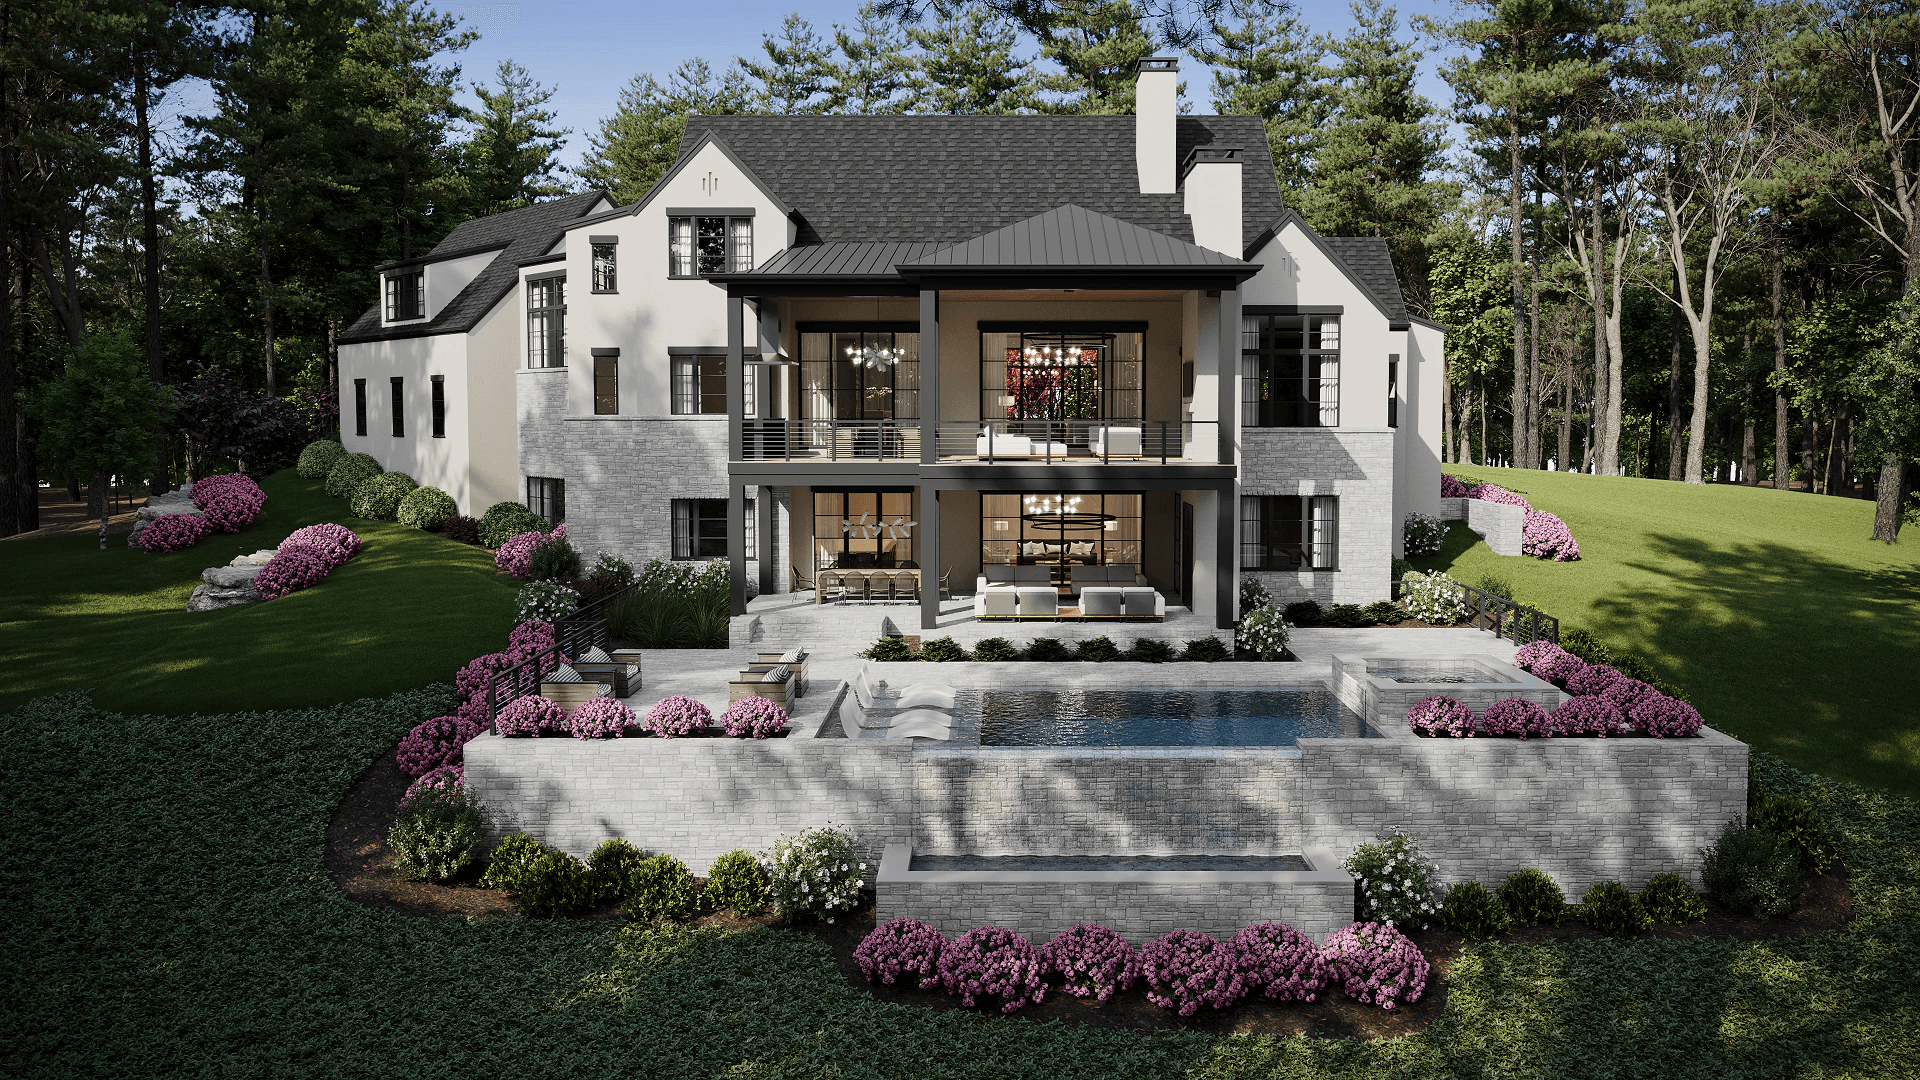 3D Services for Real Estate: Exterior Rendering